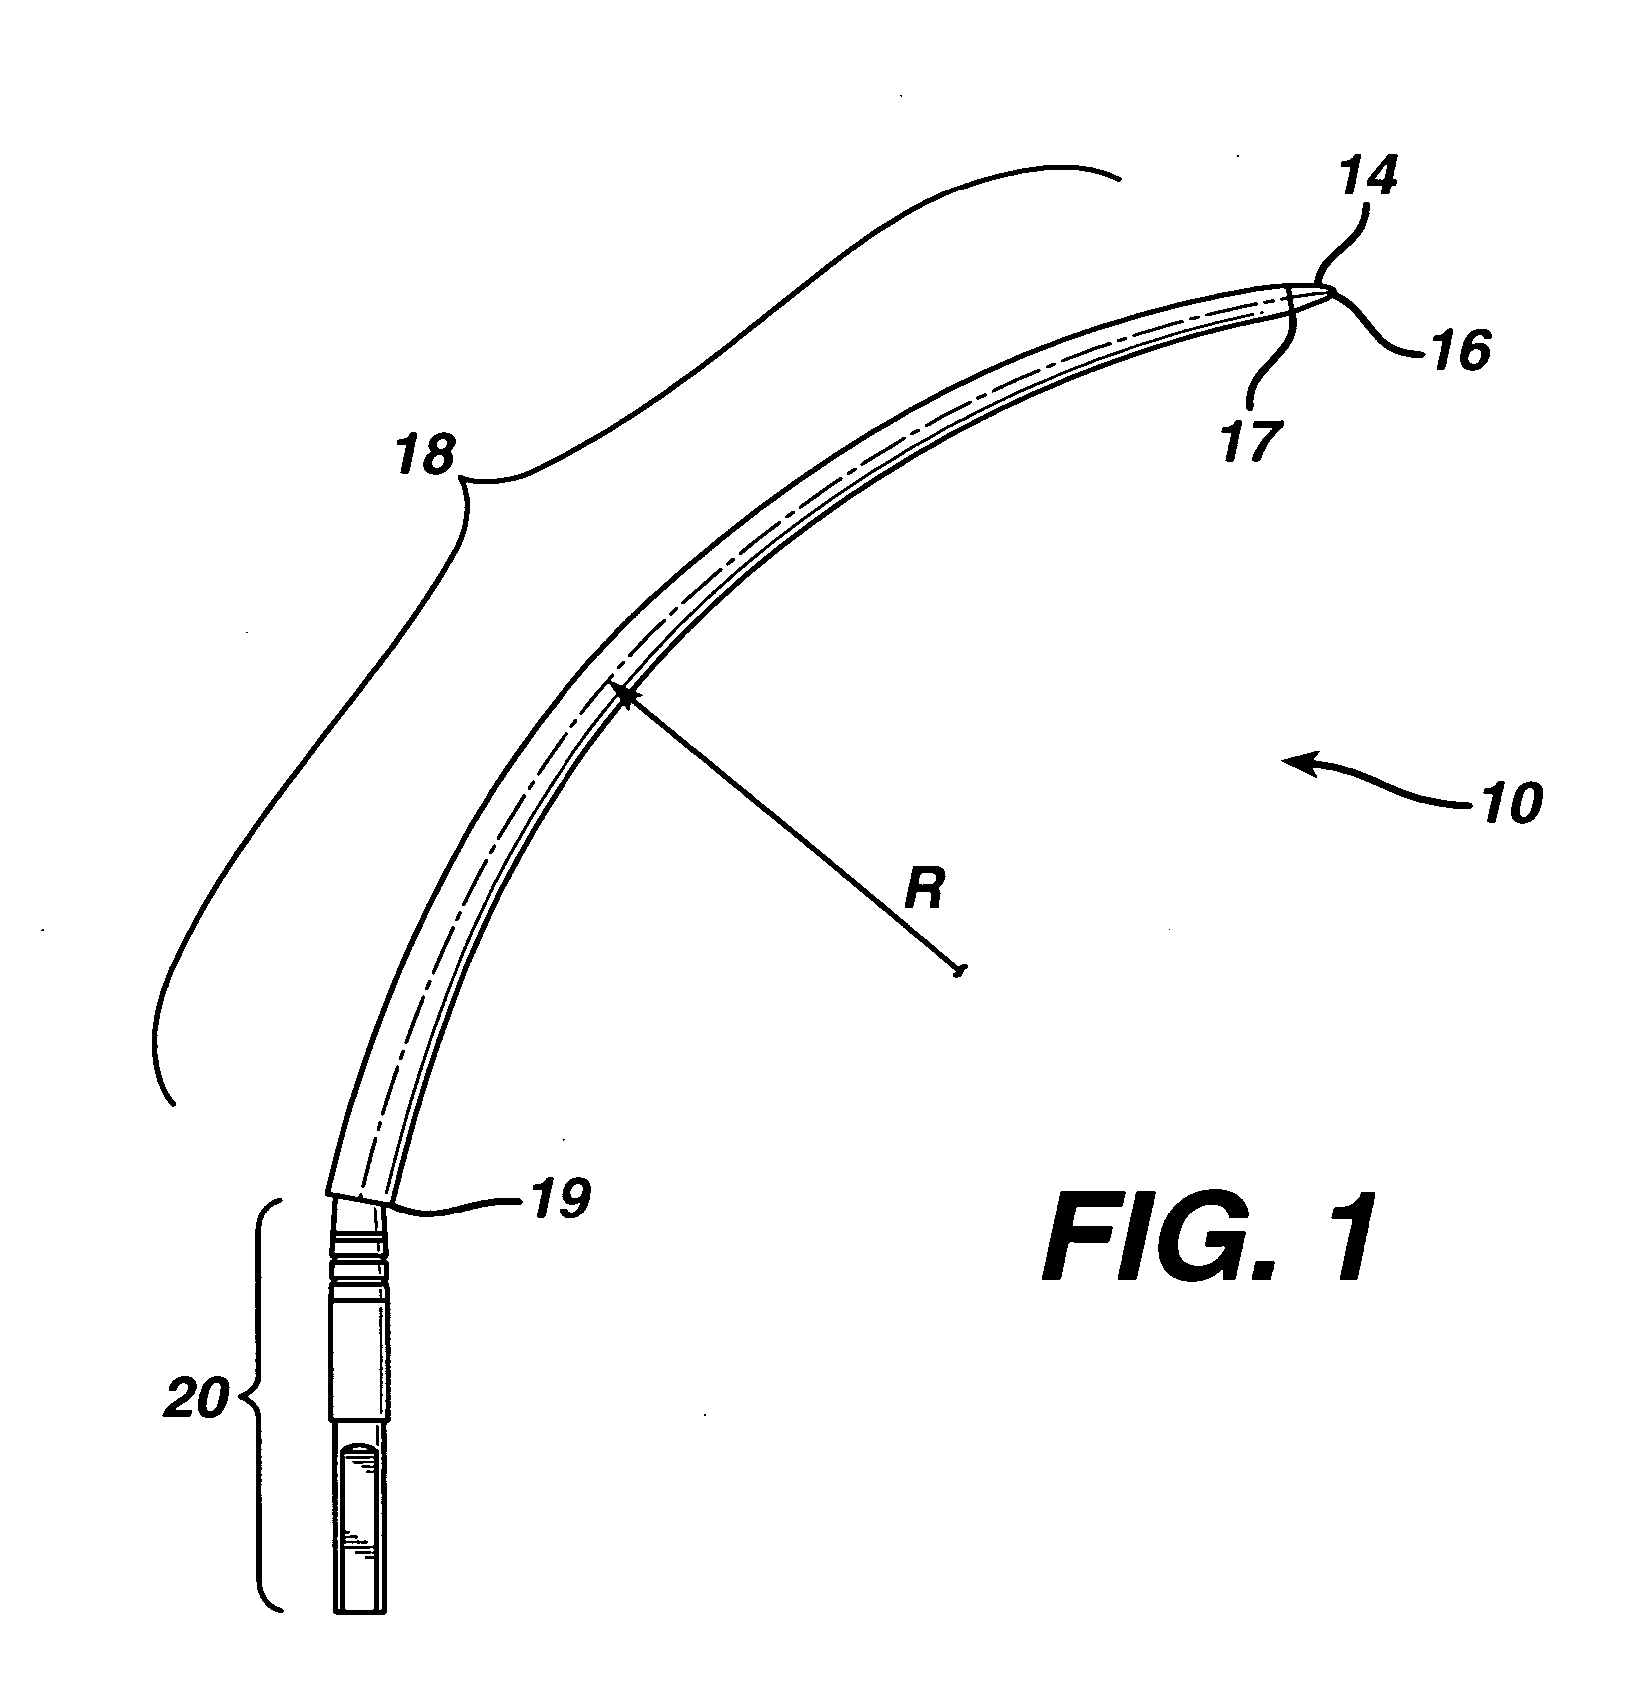 Method and apparatus for adjusting flexible areal polymer implants